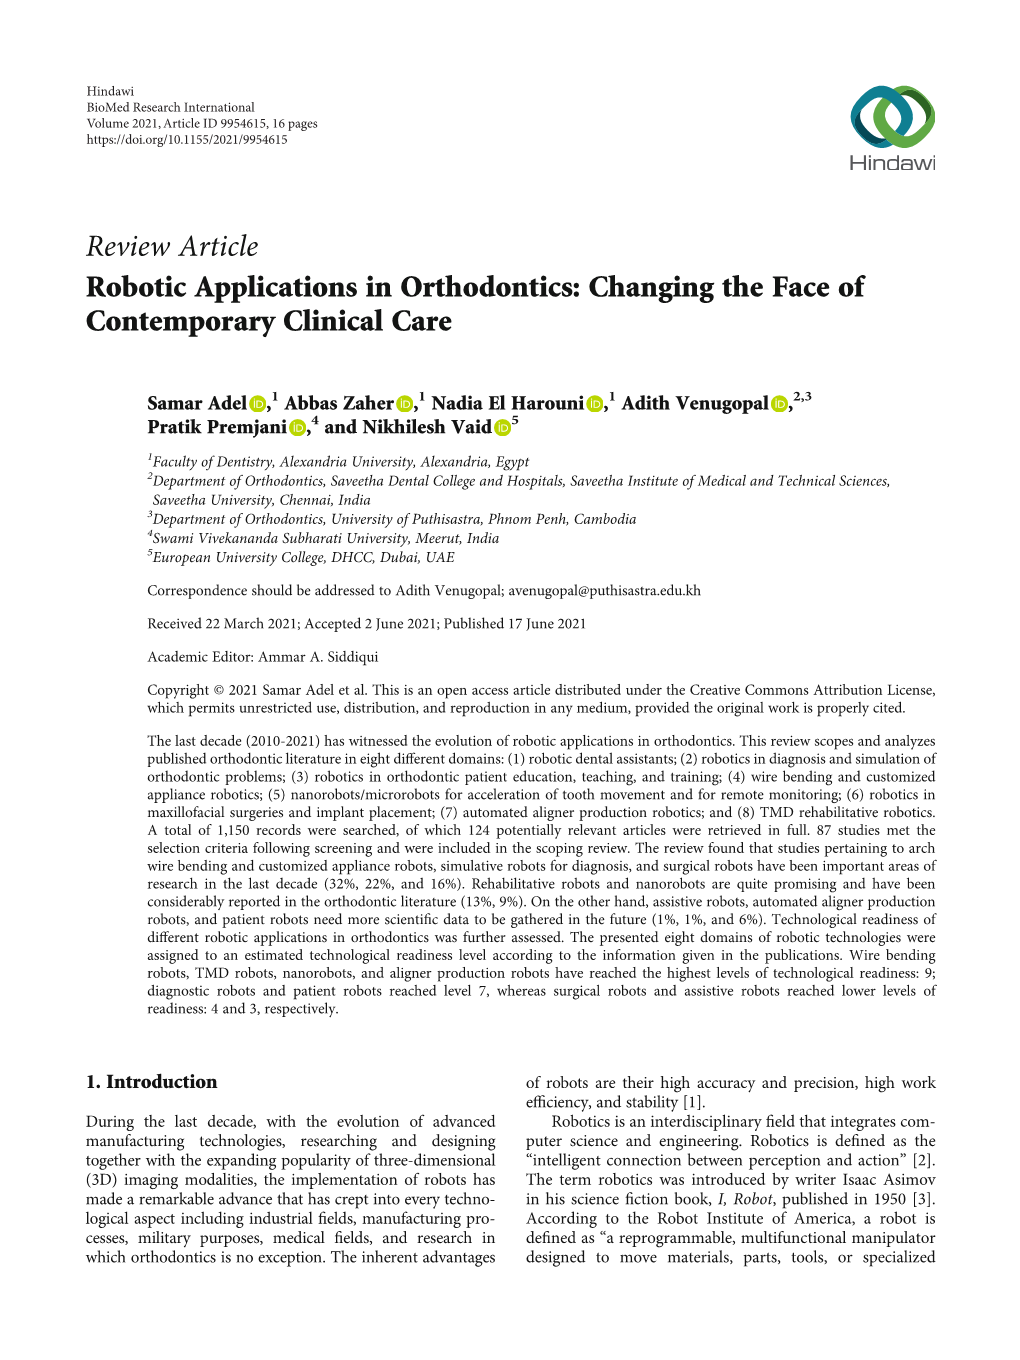 Robotic Applications in Orthodontics: Changing the Face of Contemporary Clinical Care